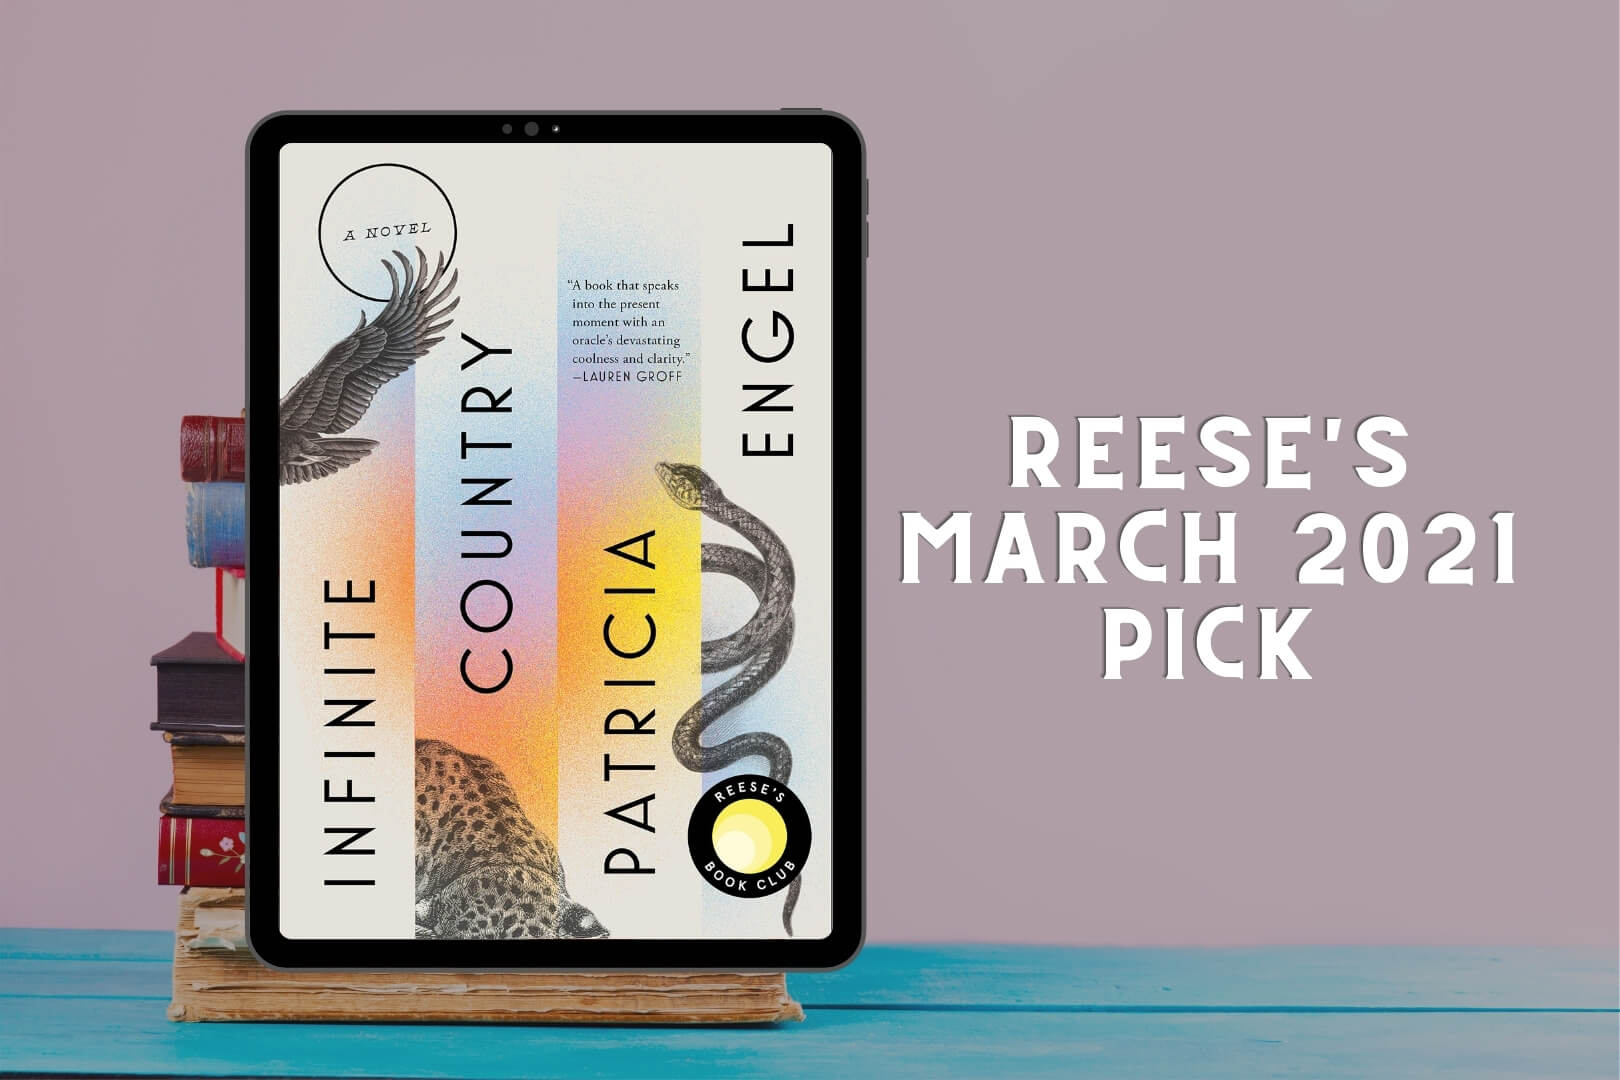 Reese’s March 2021 Book Club Pick is Infinite Country by Patricia Engel